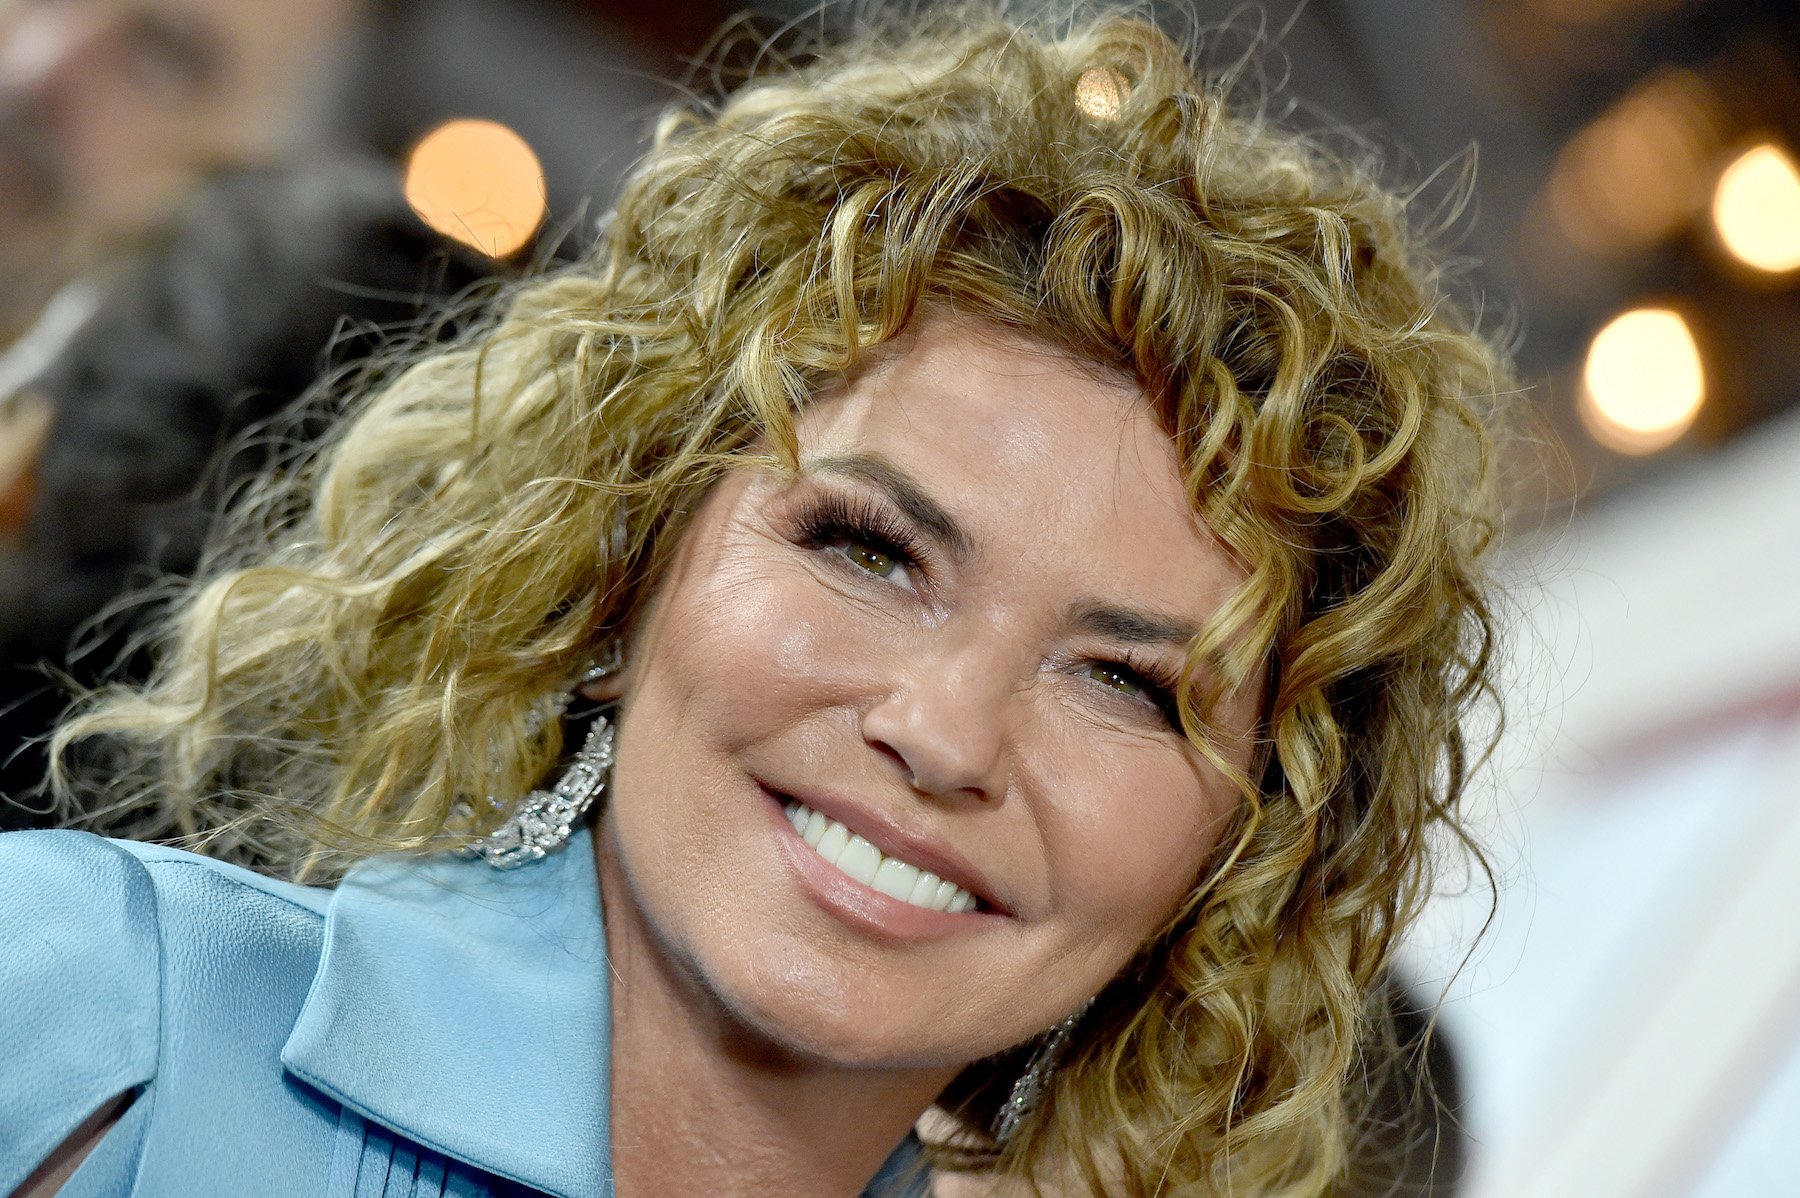 Shania Twain, who grew up with an abusive stepfather, smiling for a photo wearing turquoise